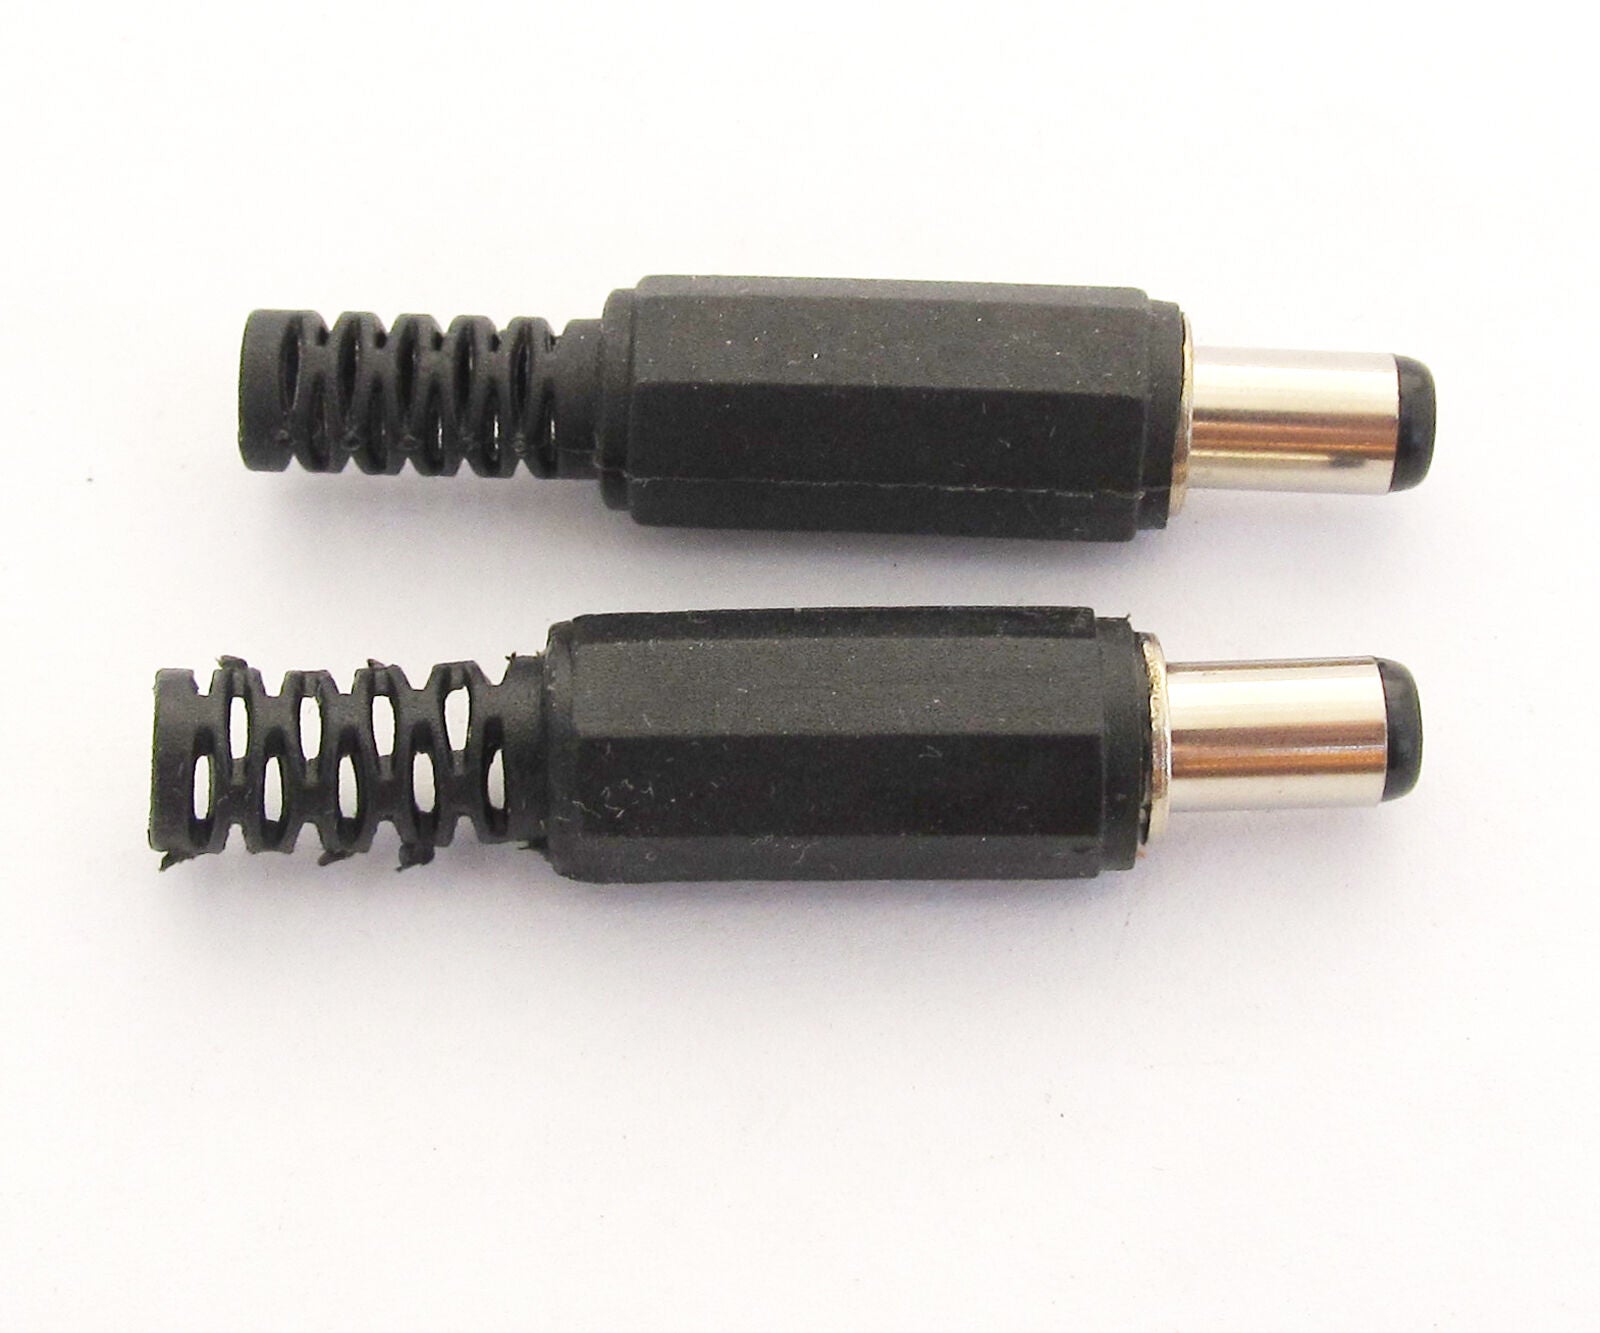 1pc 2.5x5.5mm 2.5mm DC Power Male Plug Soldering Connector Plastic Cover Black